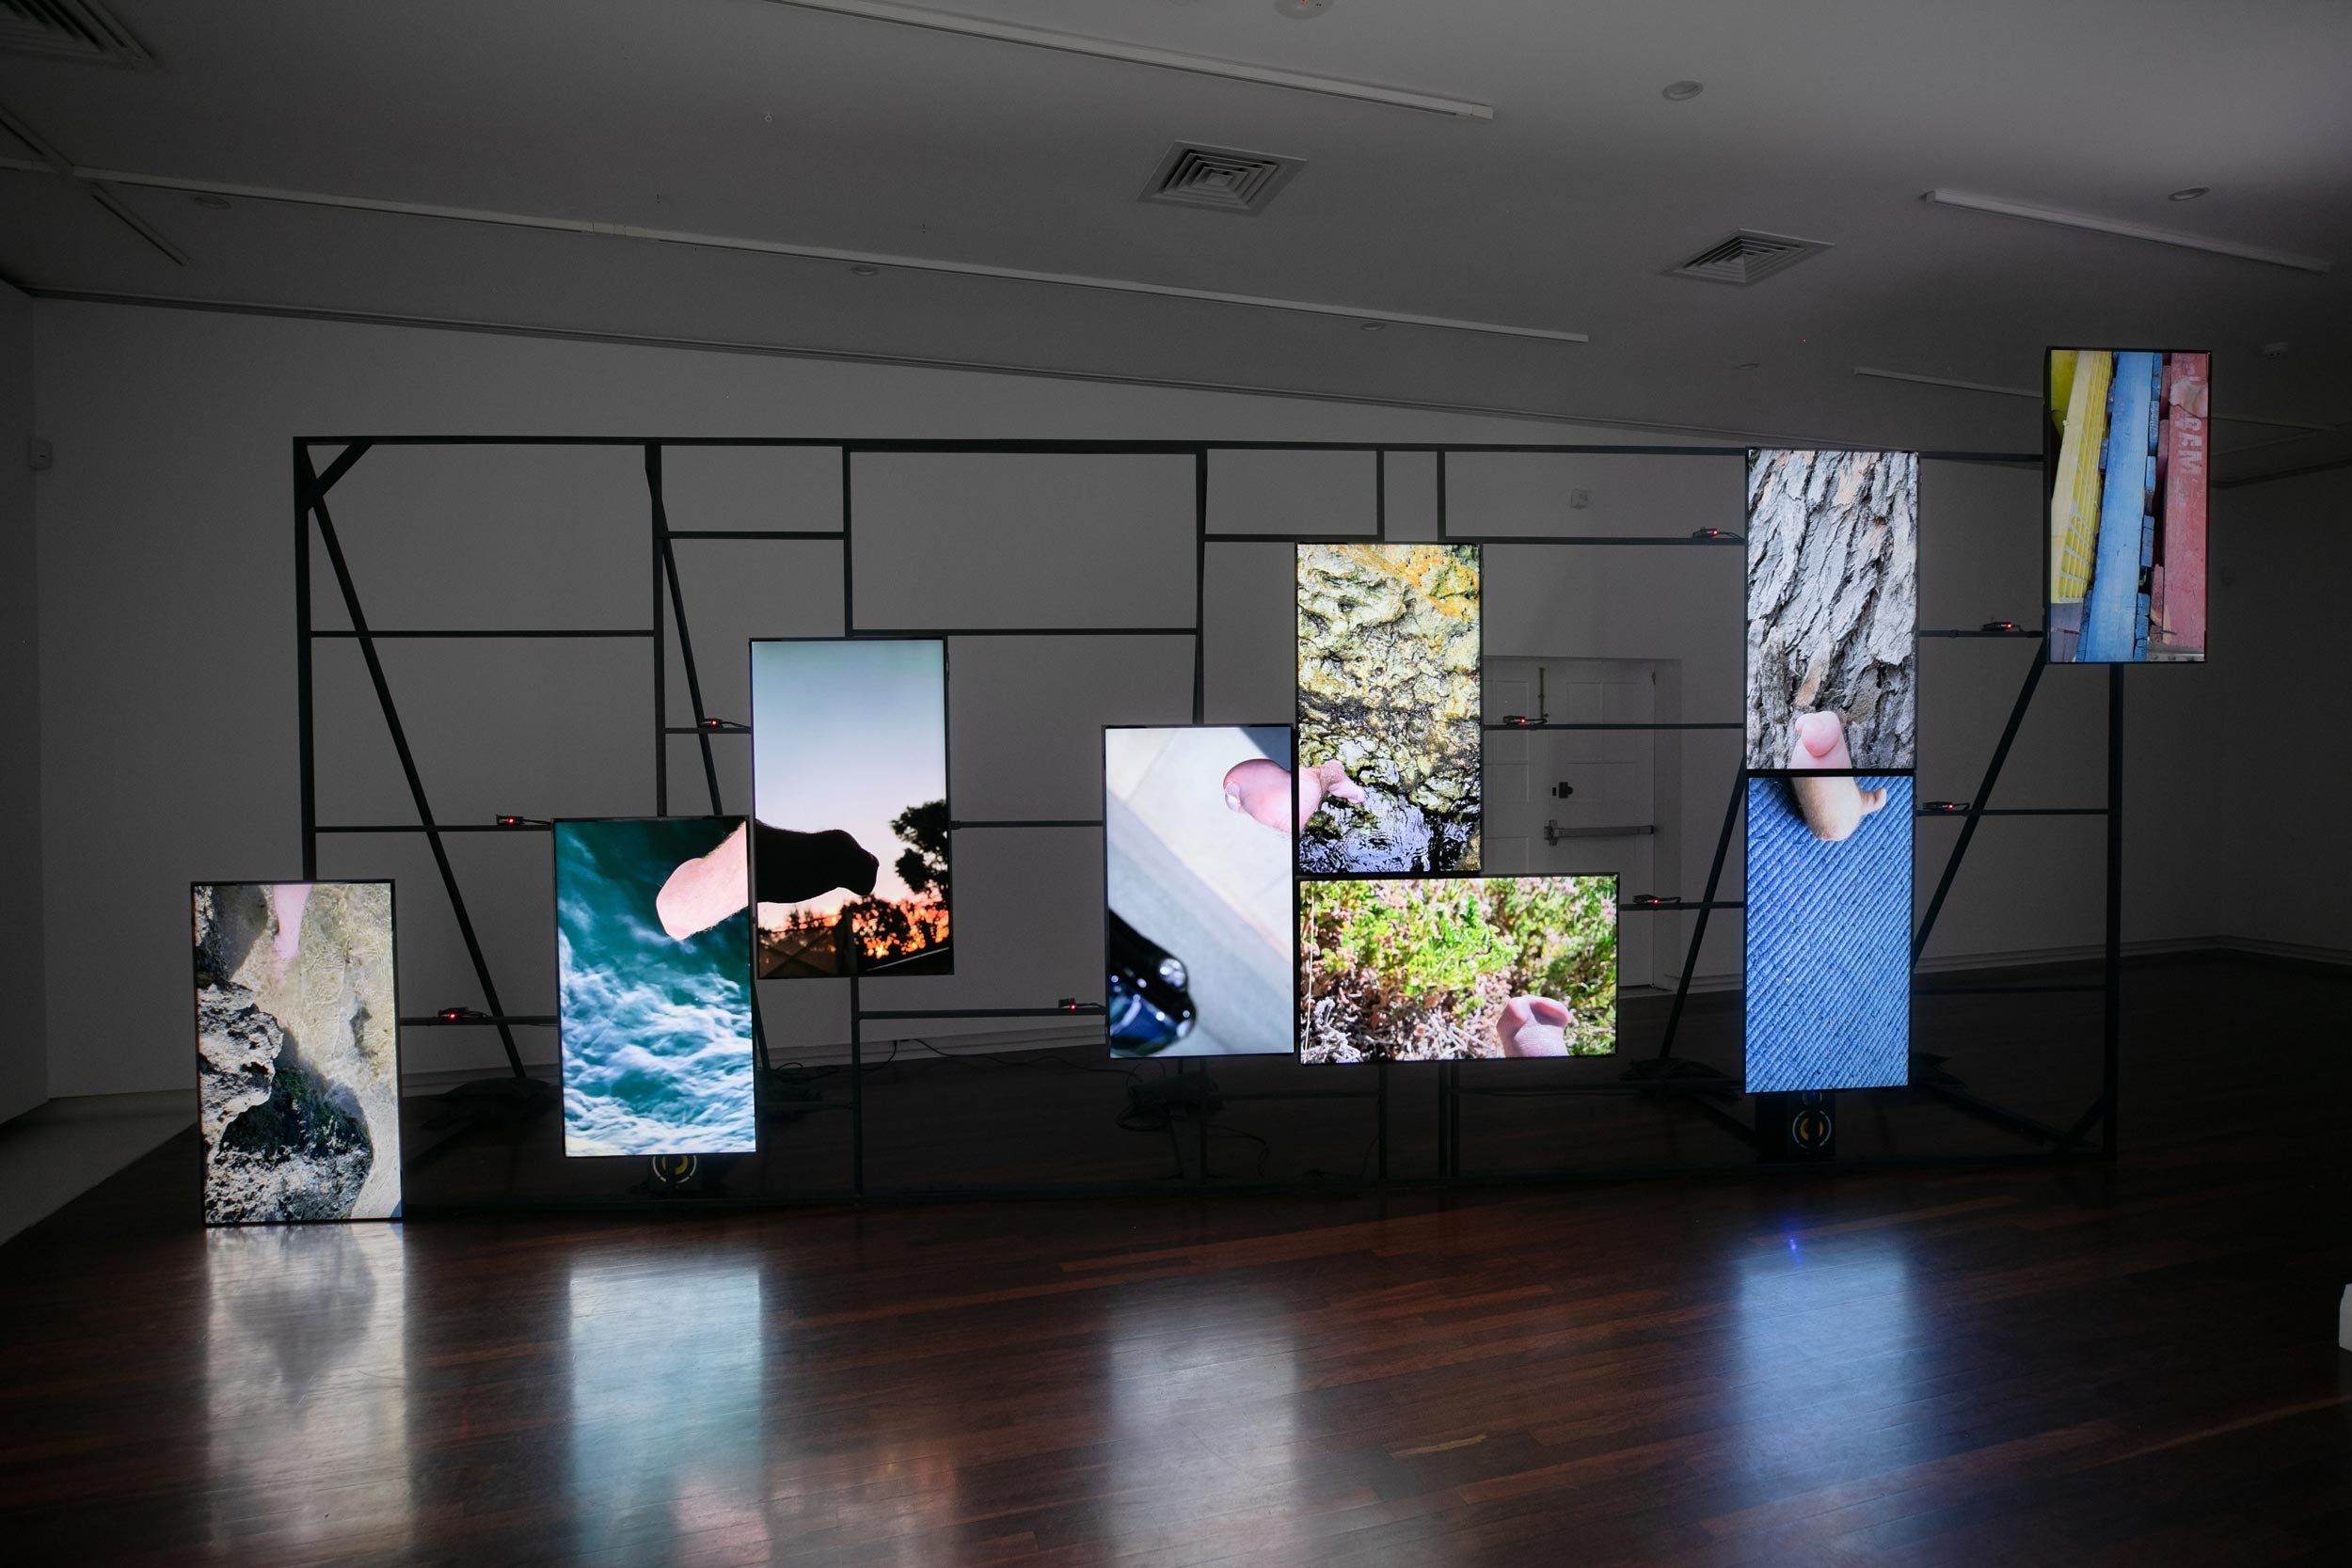 image shoes 9 large screens mounted to a thin black frame, each screen depicts a different scene 